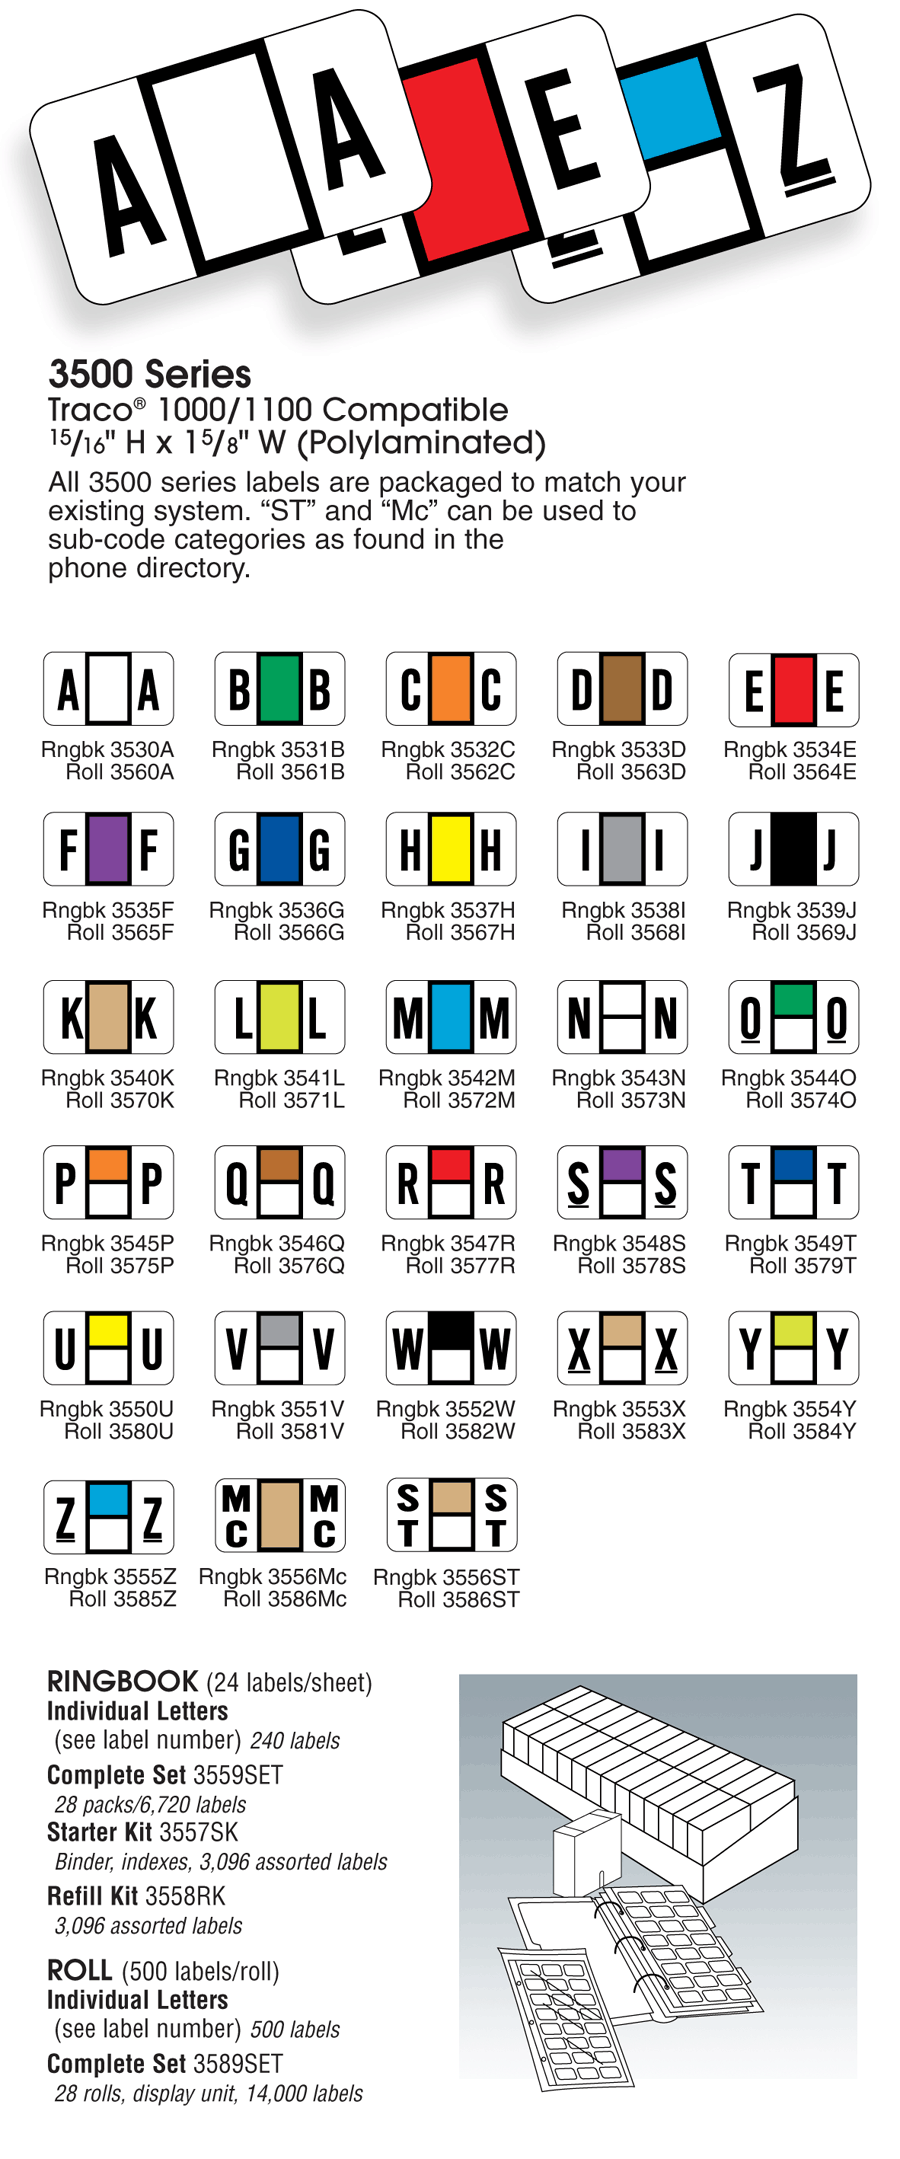 traco_alpha_labels_1000_1100_series_color_code_folders_charts